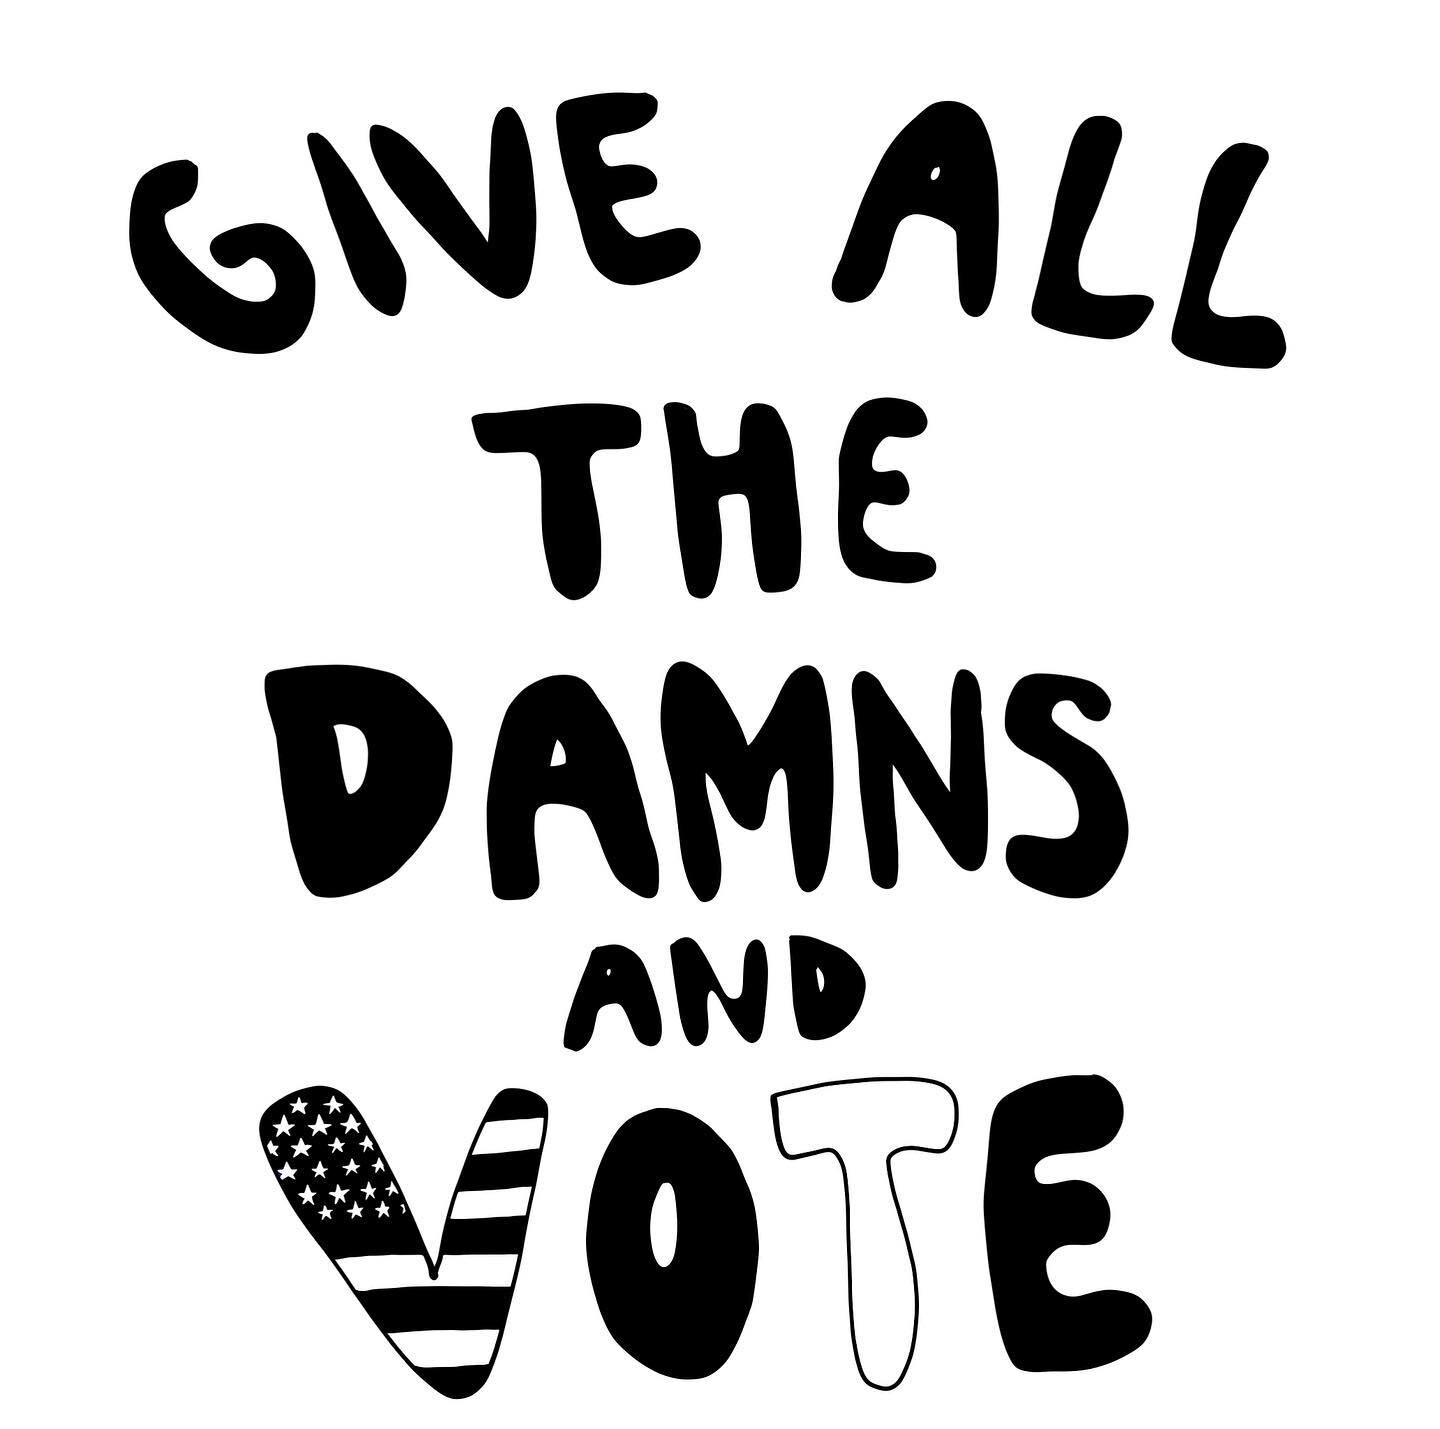 Who&rsquo;s ready for the weekend? Get out the VOTE! 
🇺🇸
🇺🇸
🇺🇸
🇺🇸

#vote2020 #getoutthevote #getoutthevote2020  #marvinandtaco #postcardswithapurpose #votelikeyourlifedependsonit #changethesystem #votelikeyougiveadamn #votelikeyoumeanit #bide